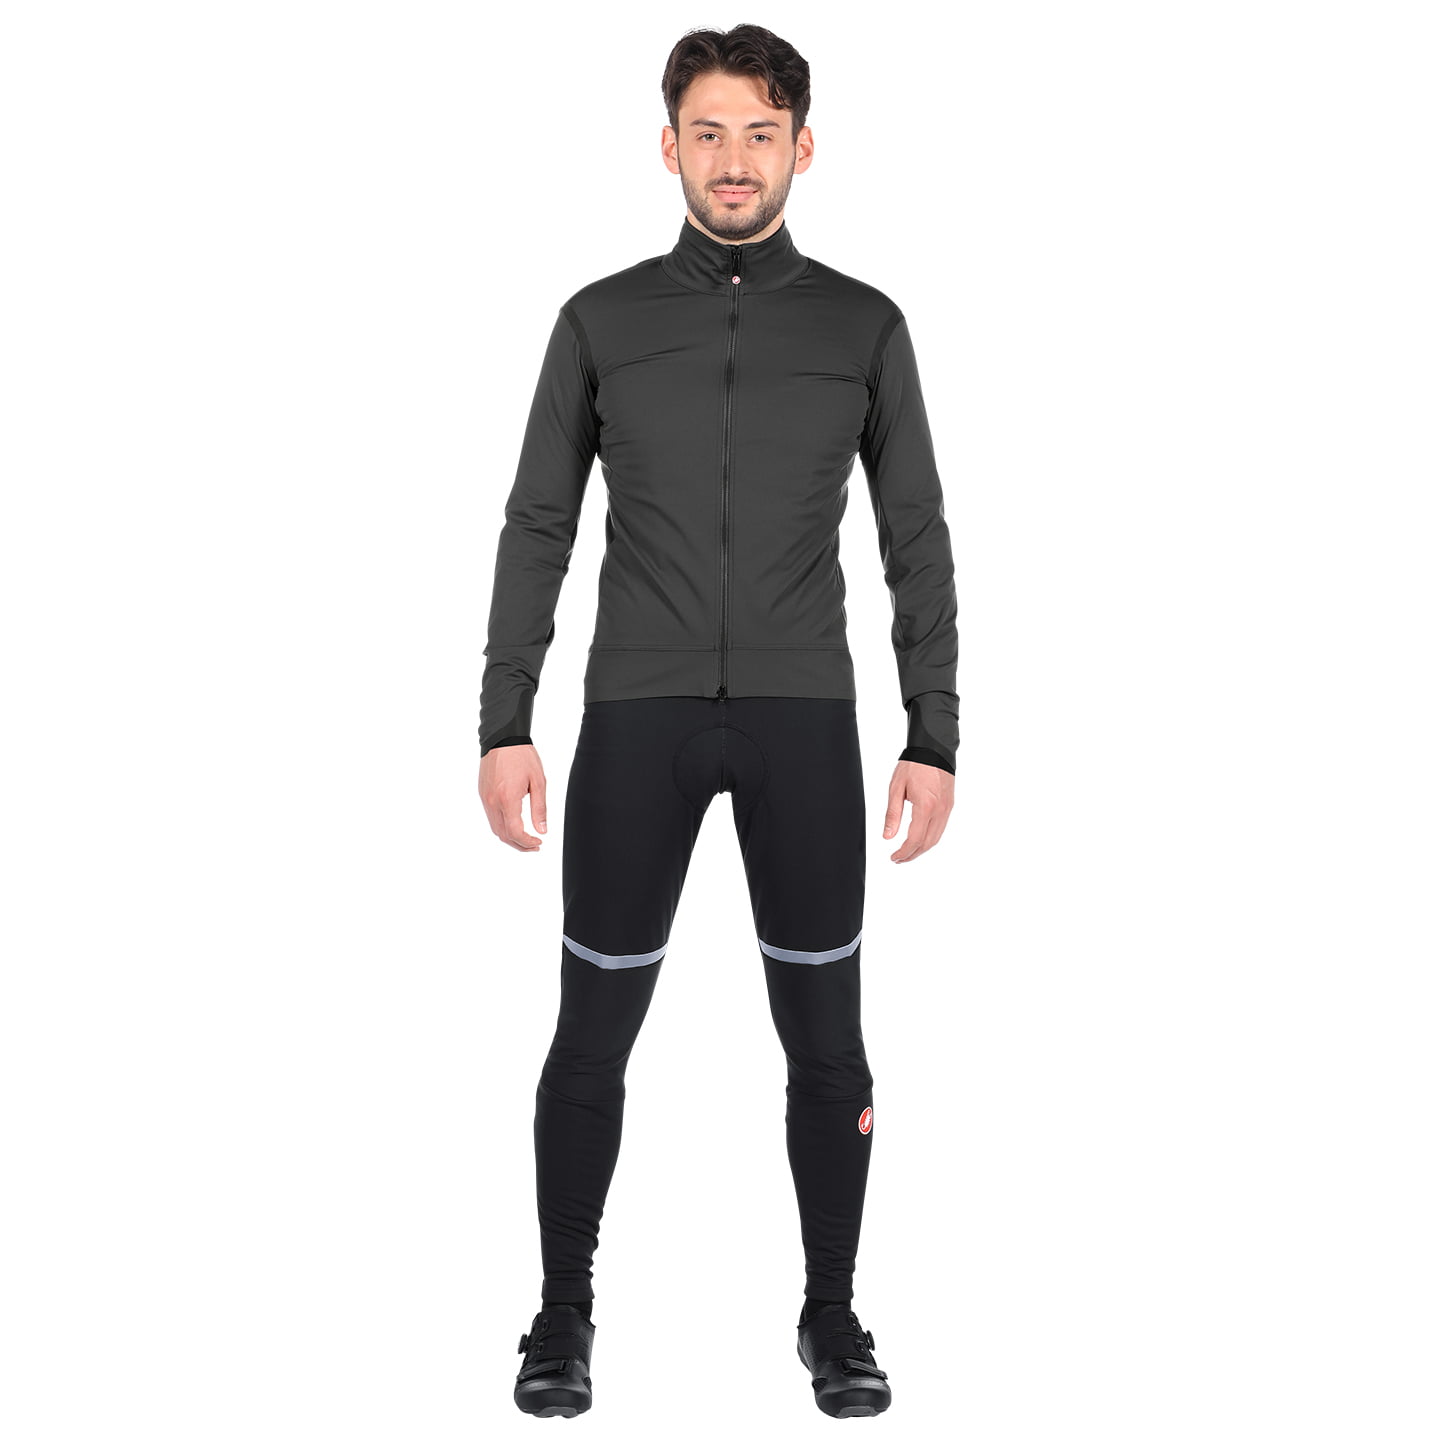 CASTELLI Alpha Ultimate Insulated Set (winter jacket + cycling tights) Set (2 pieces), for men